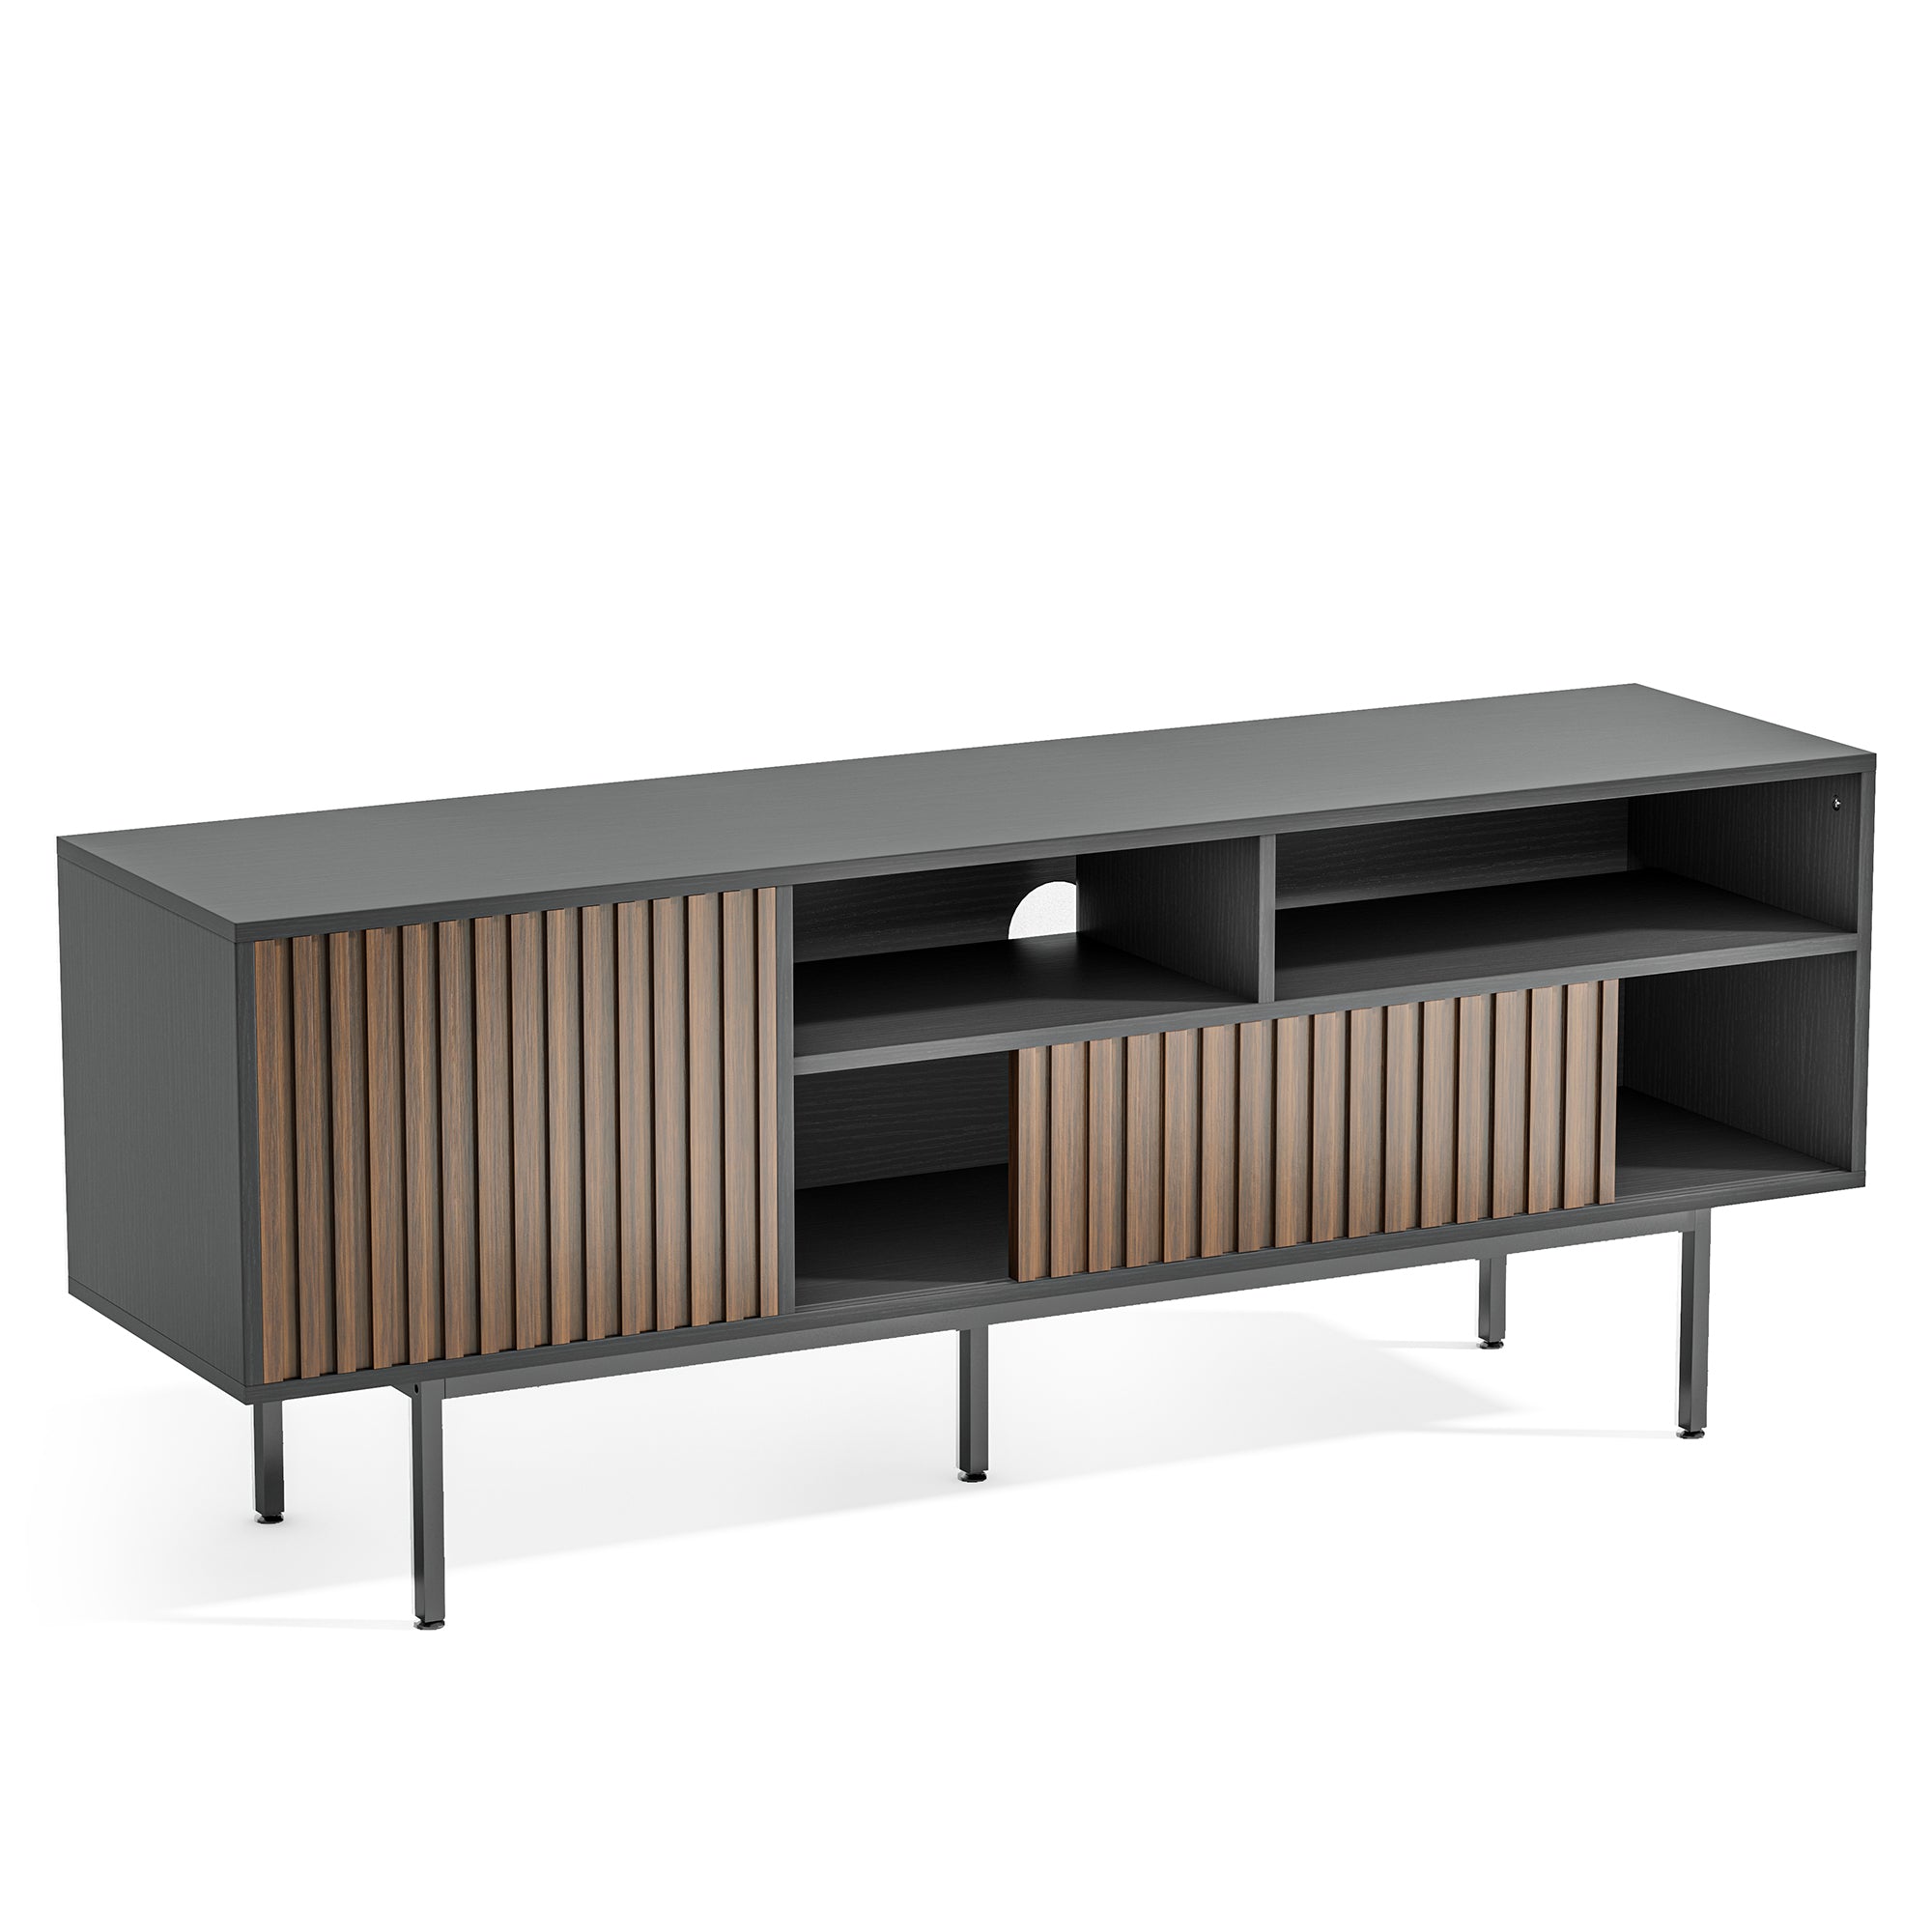 Evajoy LRF008 TV Stand, Wood Entertainment Center with Storage Shelves Cabinet, 59" Mid Century Modern Television Stand